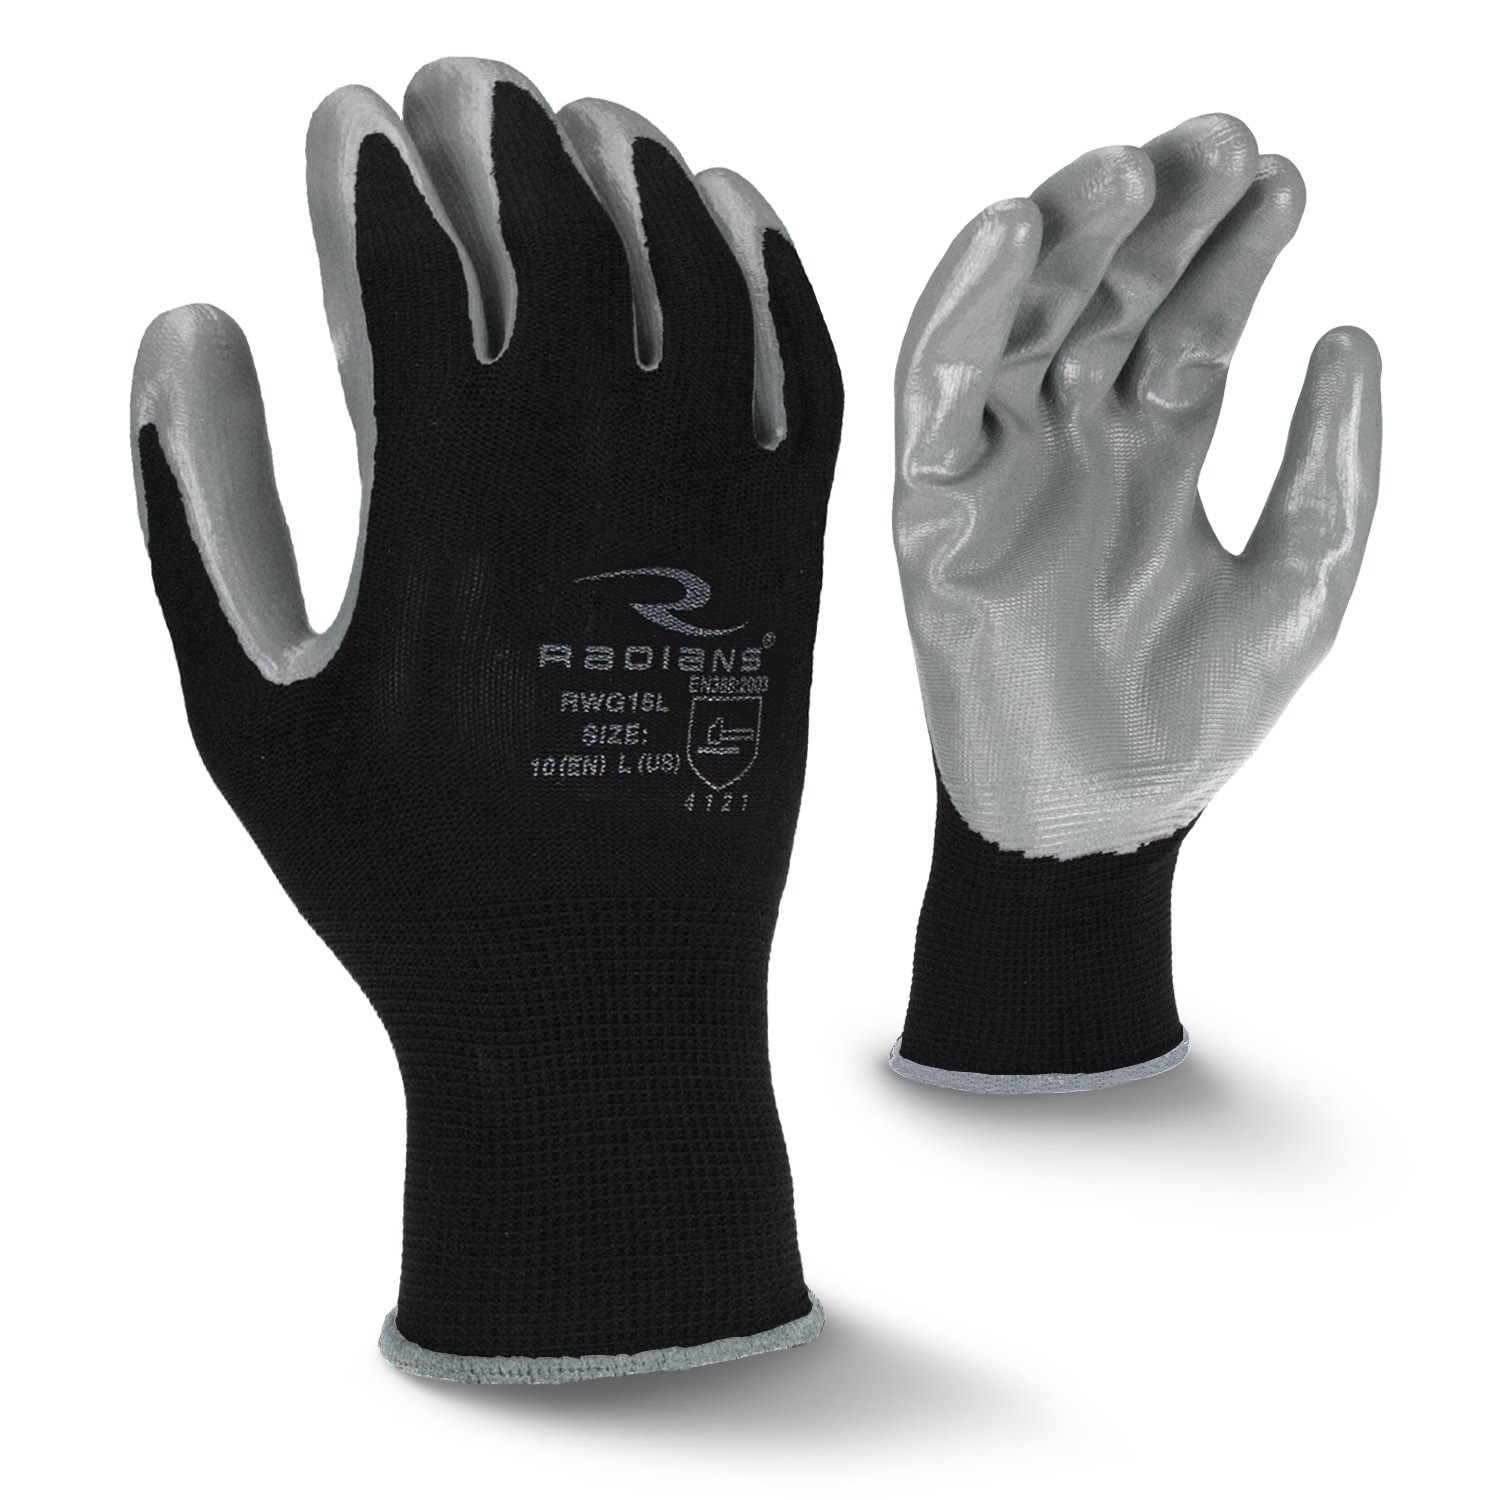 Radians Smooth Nitrile Palm Coated Glove (#RWG15)